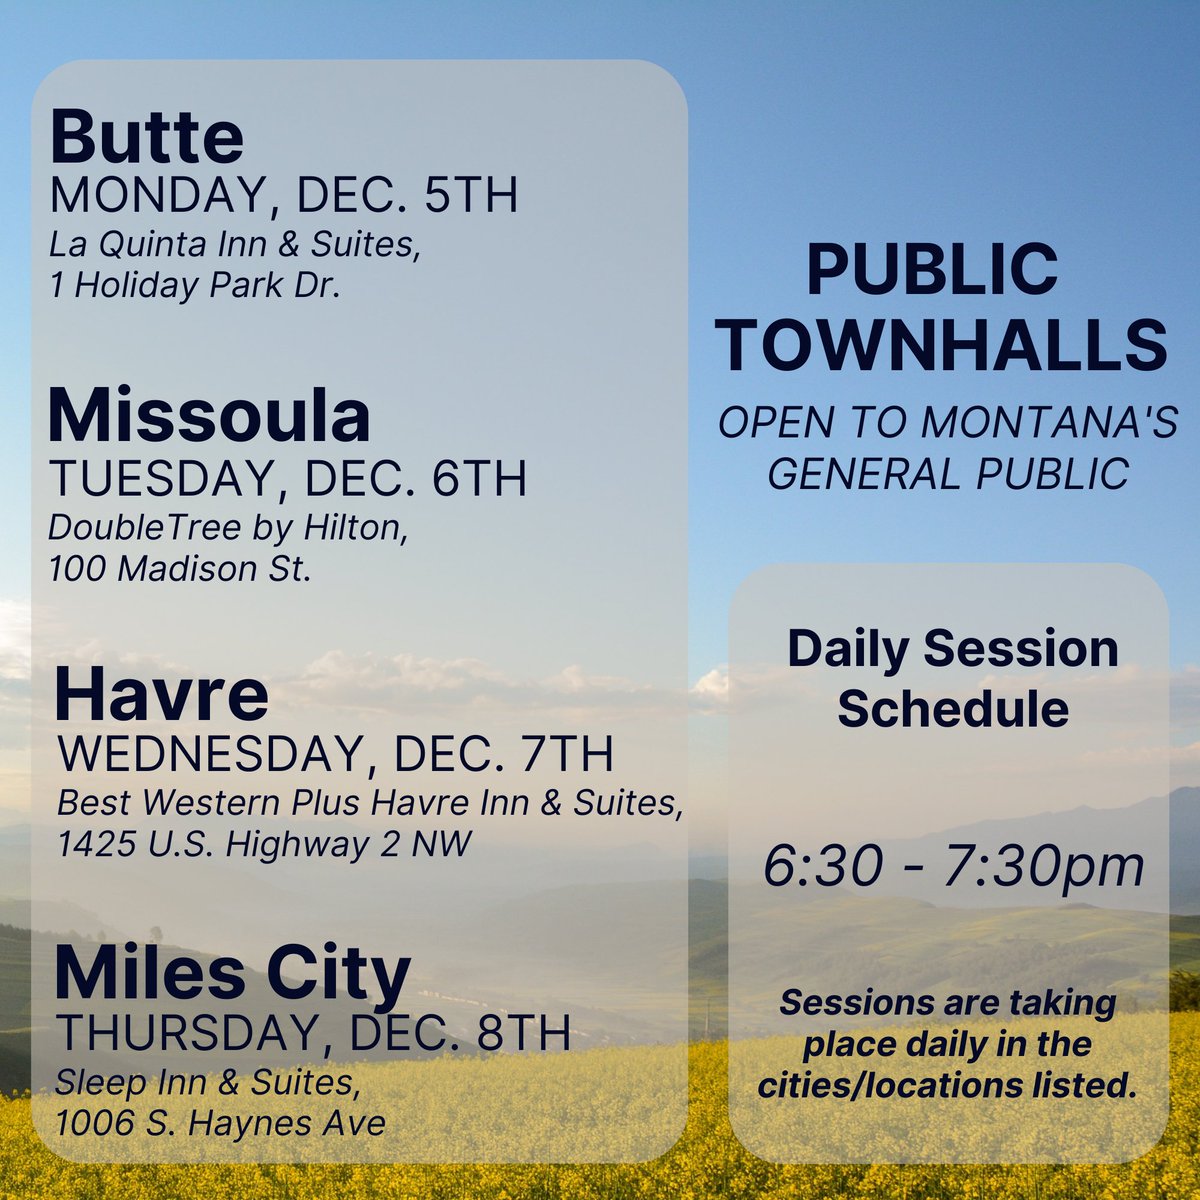 Nearly 24% of Montanans do not have an internet subscription of any kind – help Montana close the digital divide by sharing your experiences with broadband access during in-person Public Townhalls (open to the general public, no registration required). We hope to see you there!